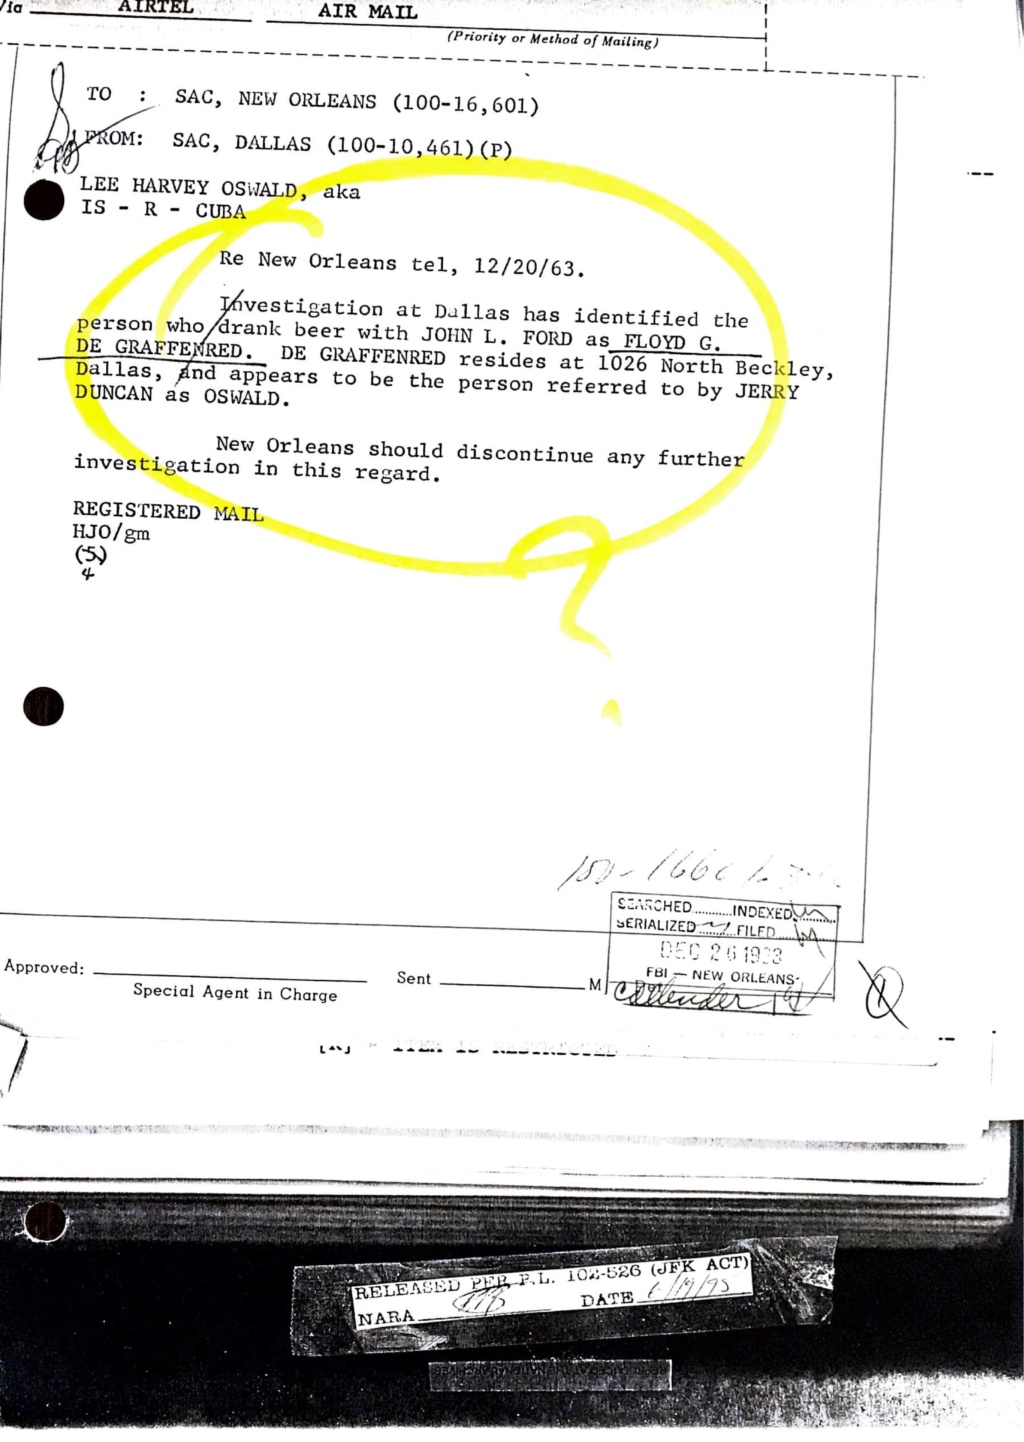 beckley - 	Did Oswald deny living at 1026 N Beckley?  - Page 8 6c480110